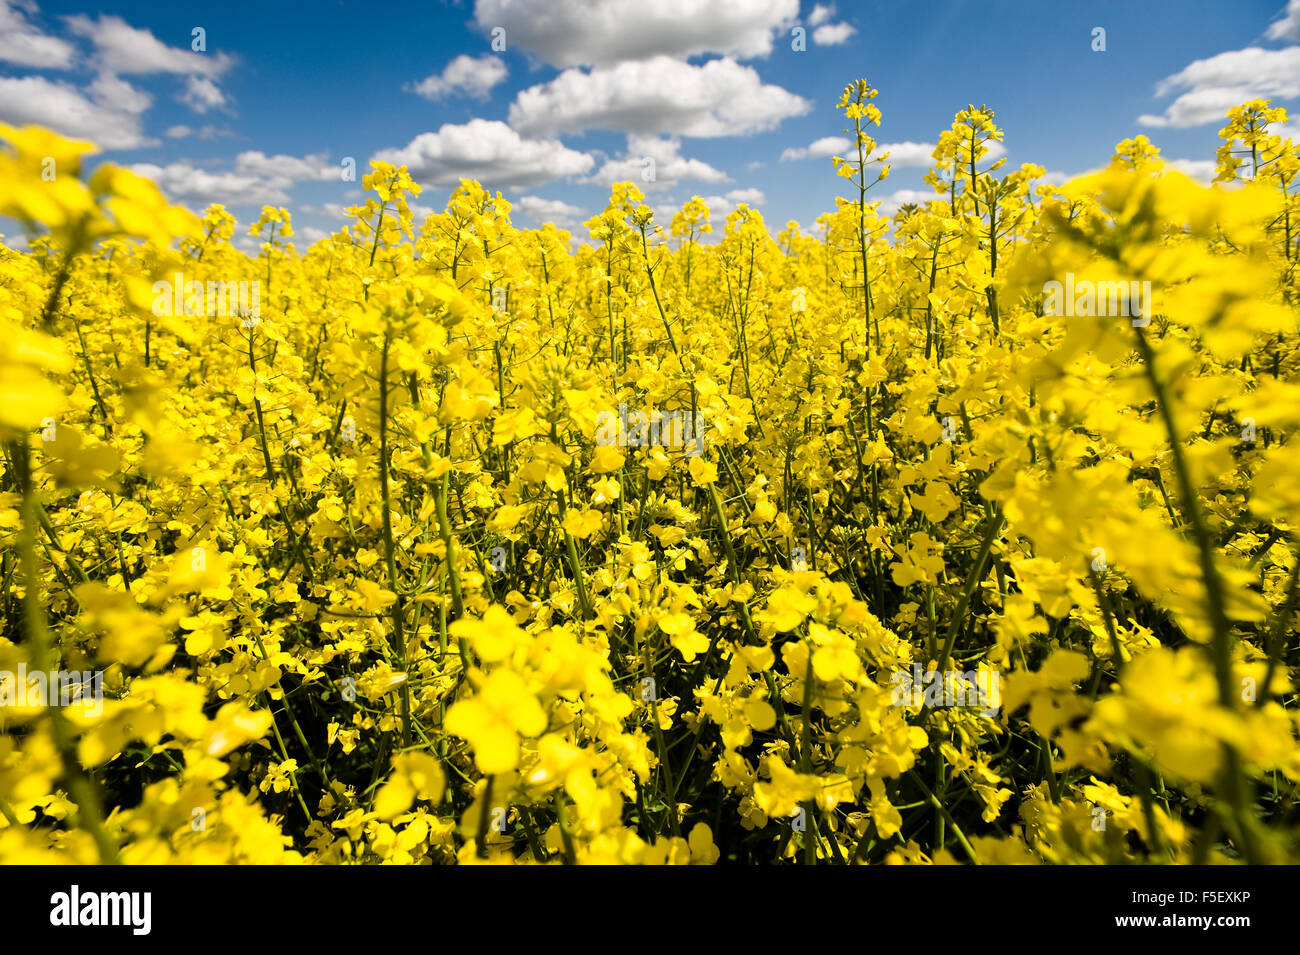 Blossoming rapeseed field with blue sky and clouds. Stock Photo